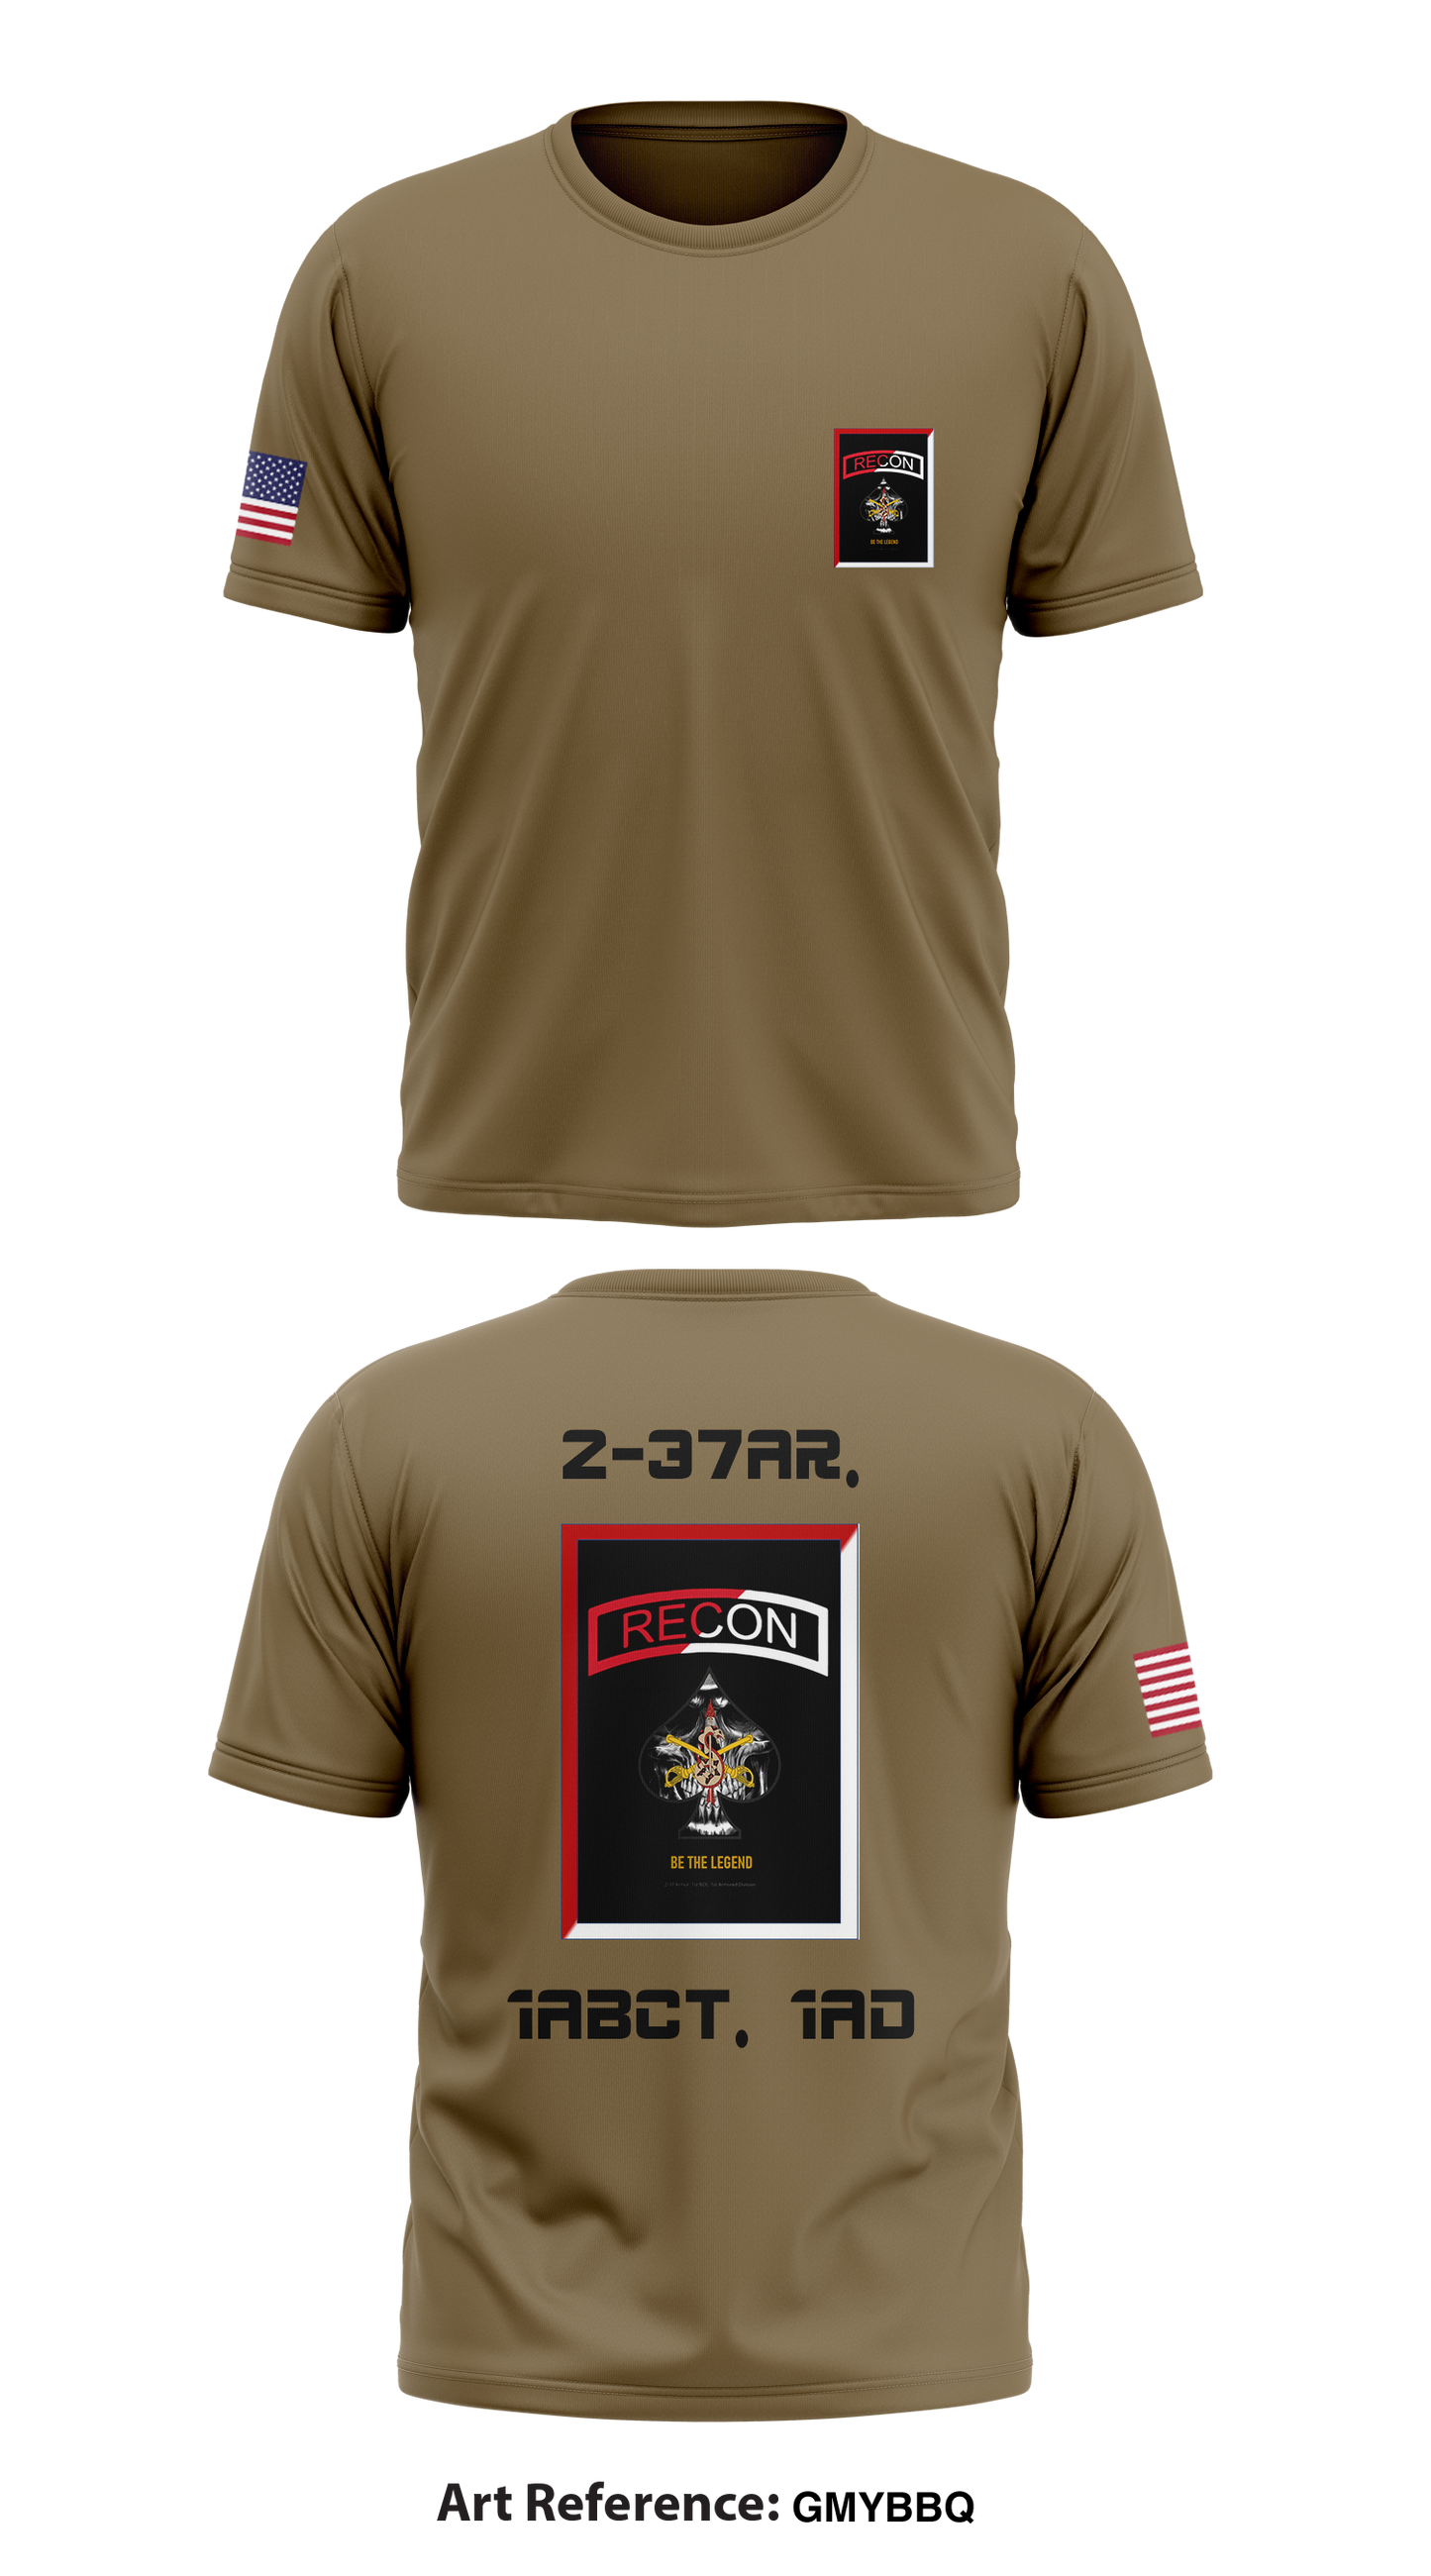 2-37AR, 1ABCT, 1AD Store 1 Core Men's SS Performance Tee - GMyBBQ